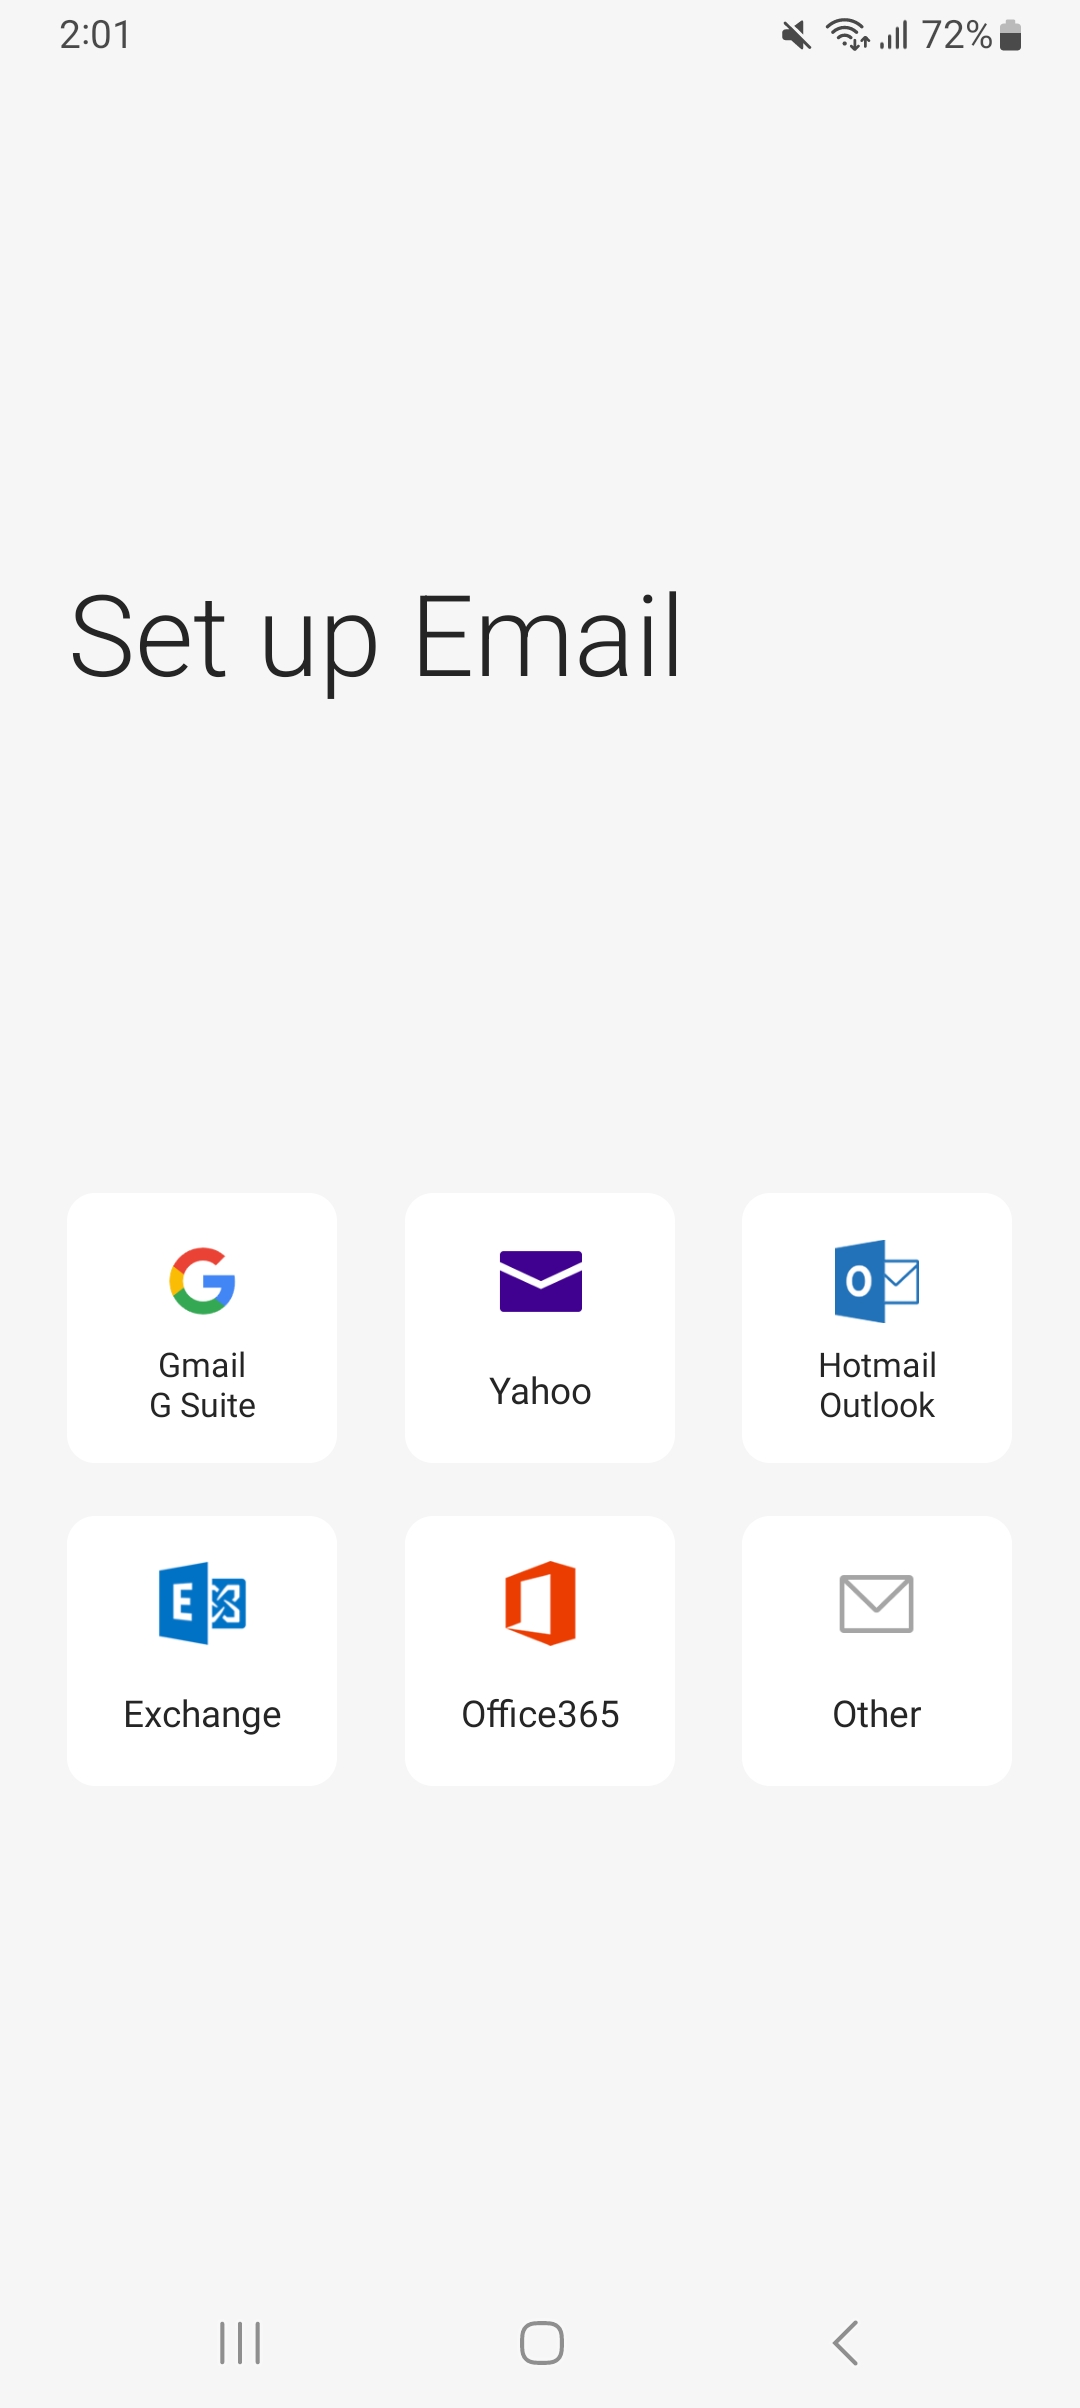 A screenshot from the Set up Email screen of the Samsung Email app.